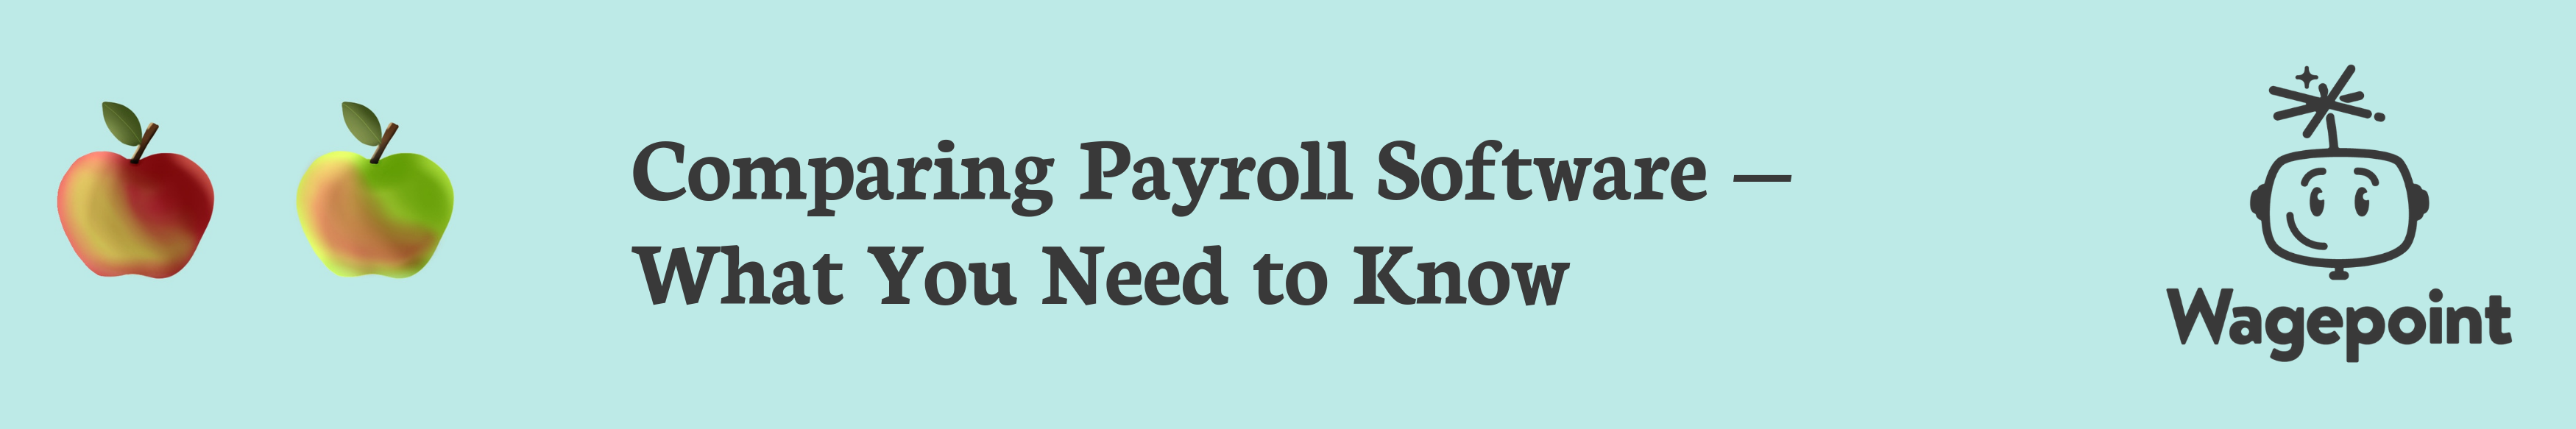 wagepoint small business payroll software comparing payroll banner